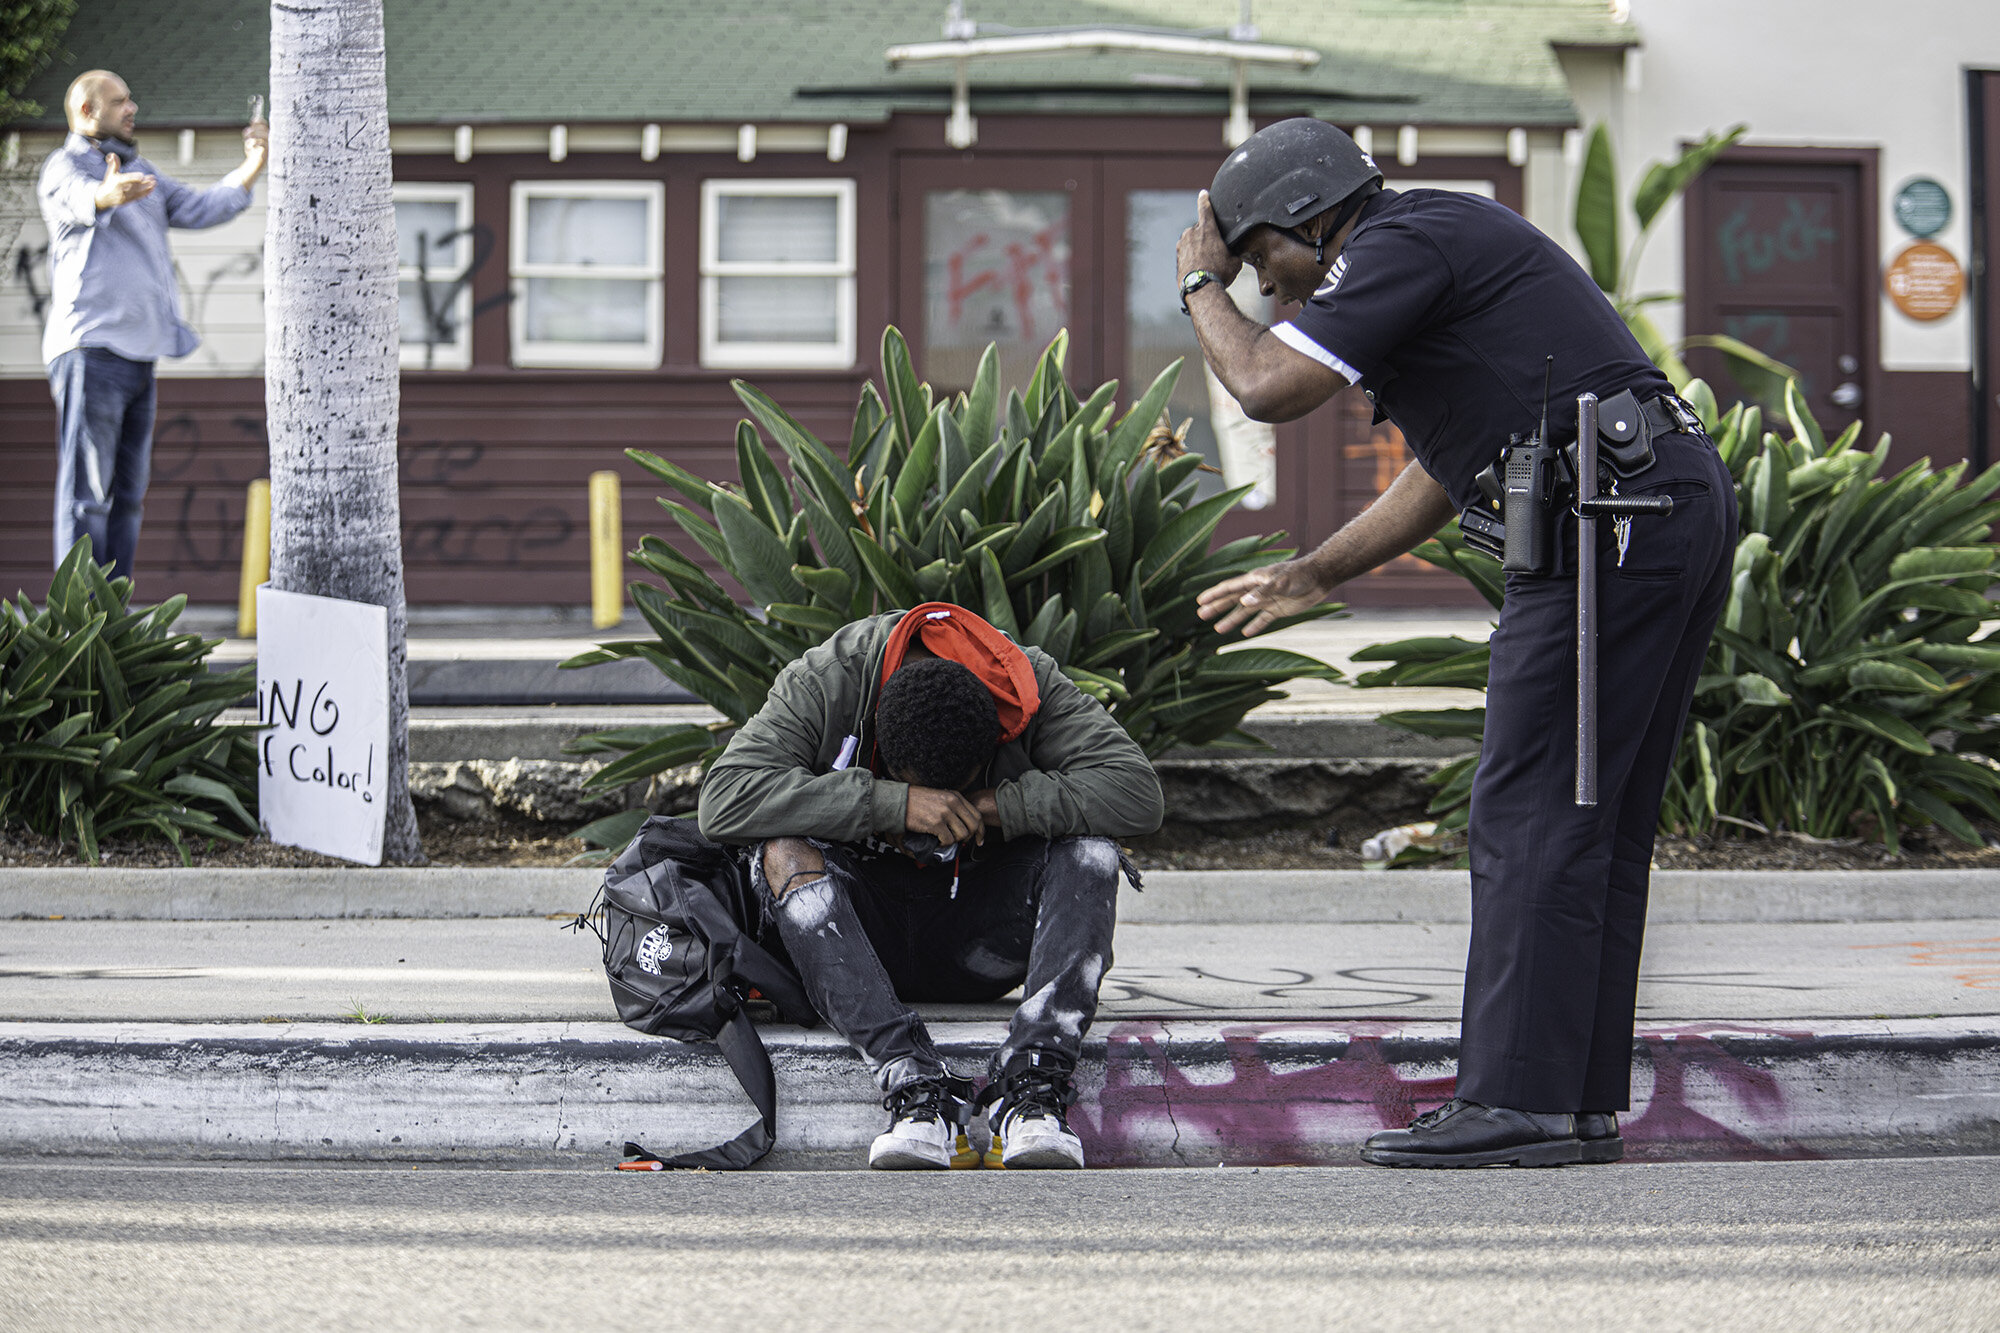  One of the protesters during the Black Lives Matter protest gets beaten by the police Friday, May 30, 2020, in Beverly hills, Calif.  